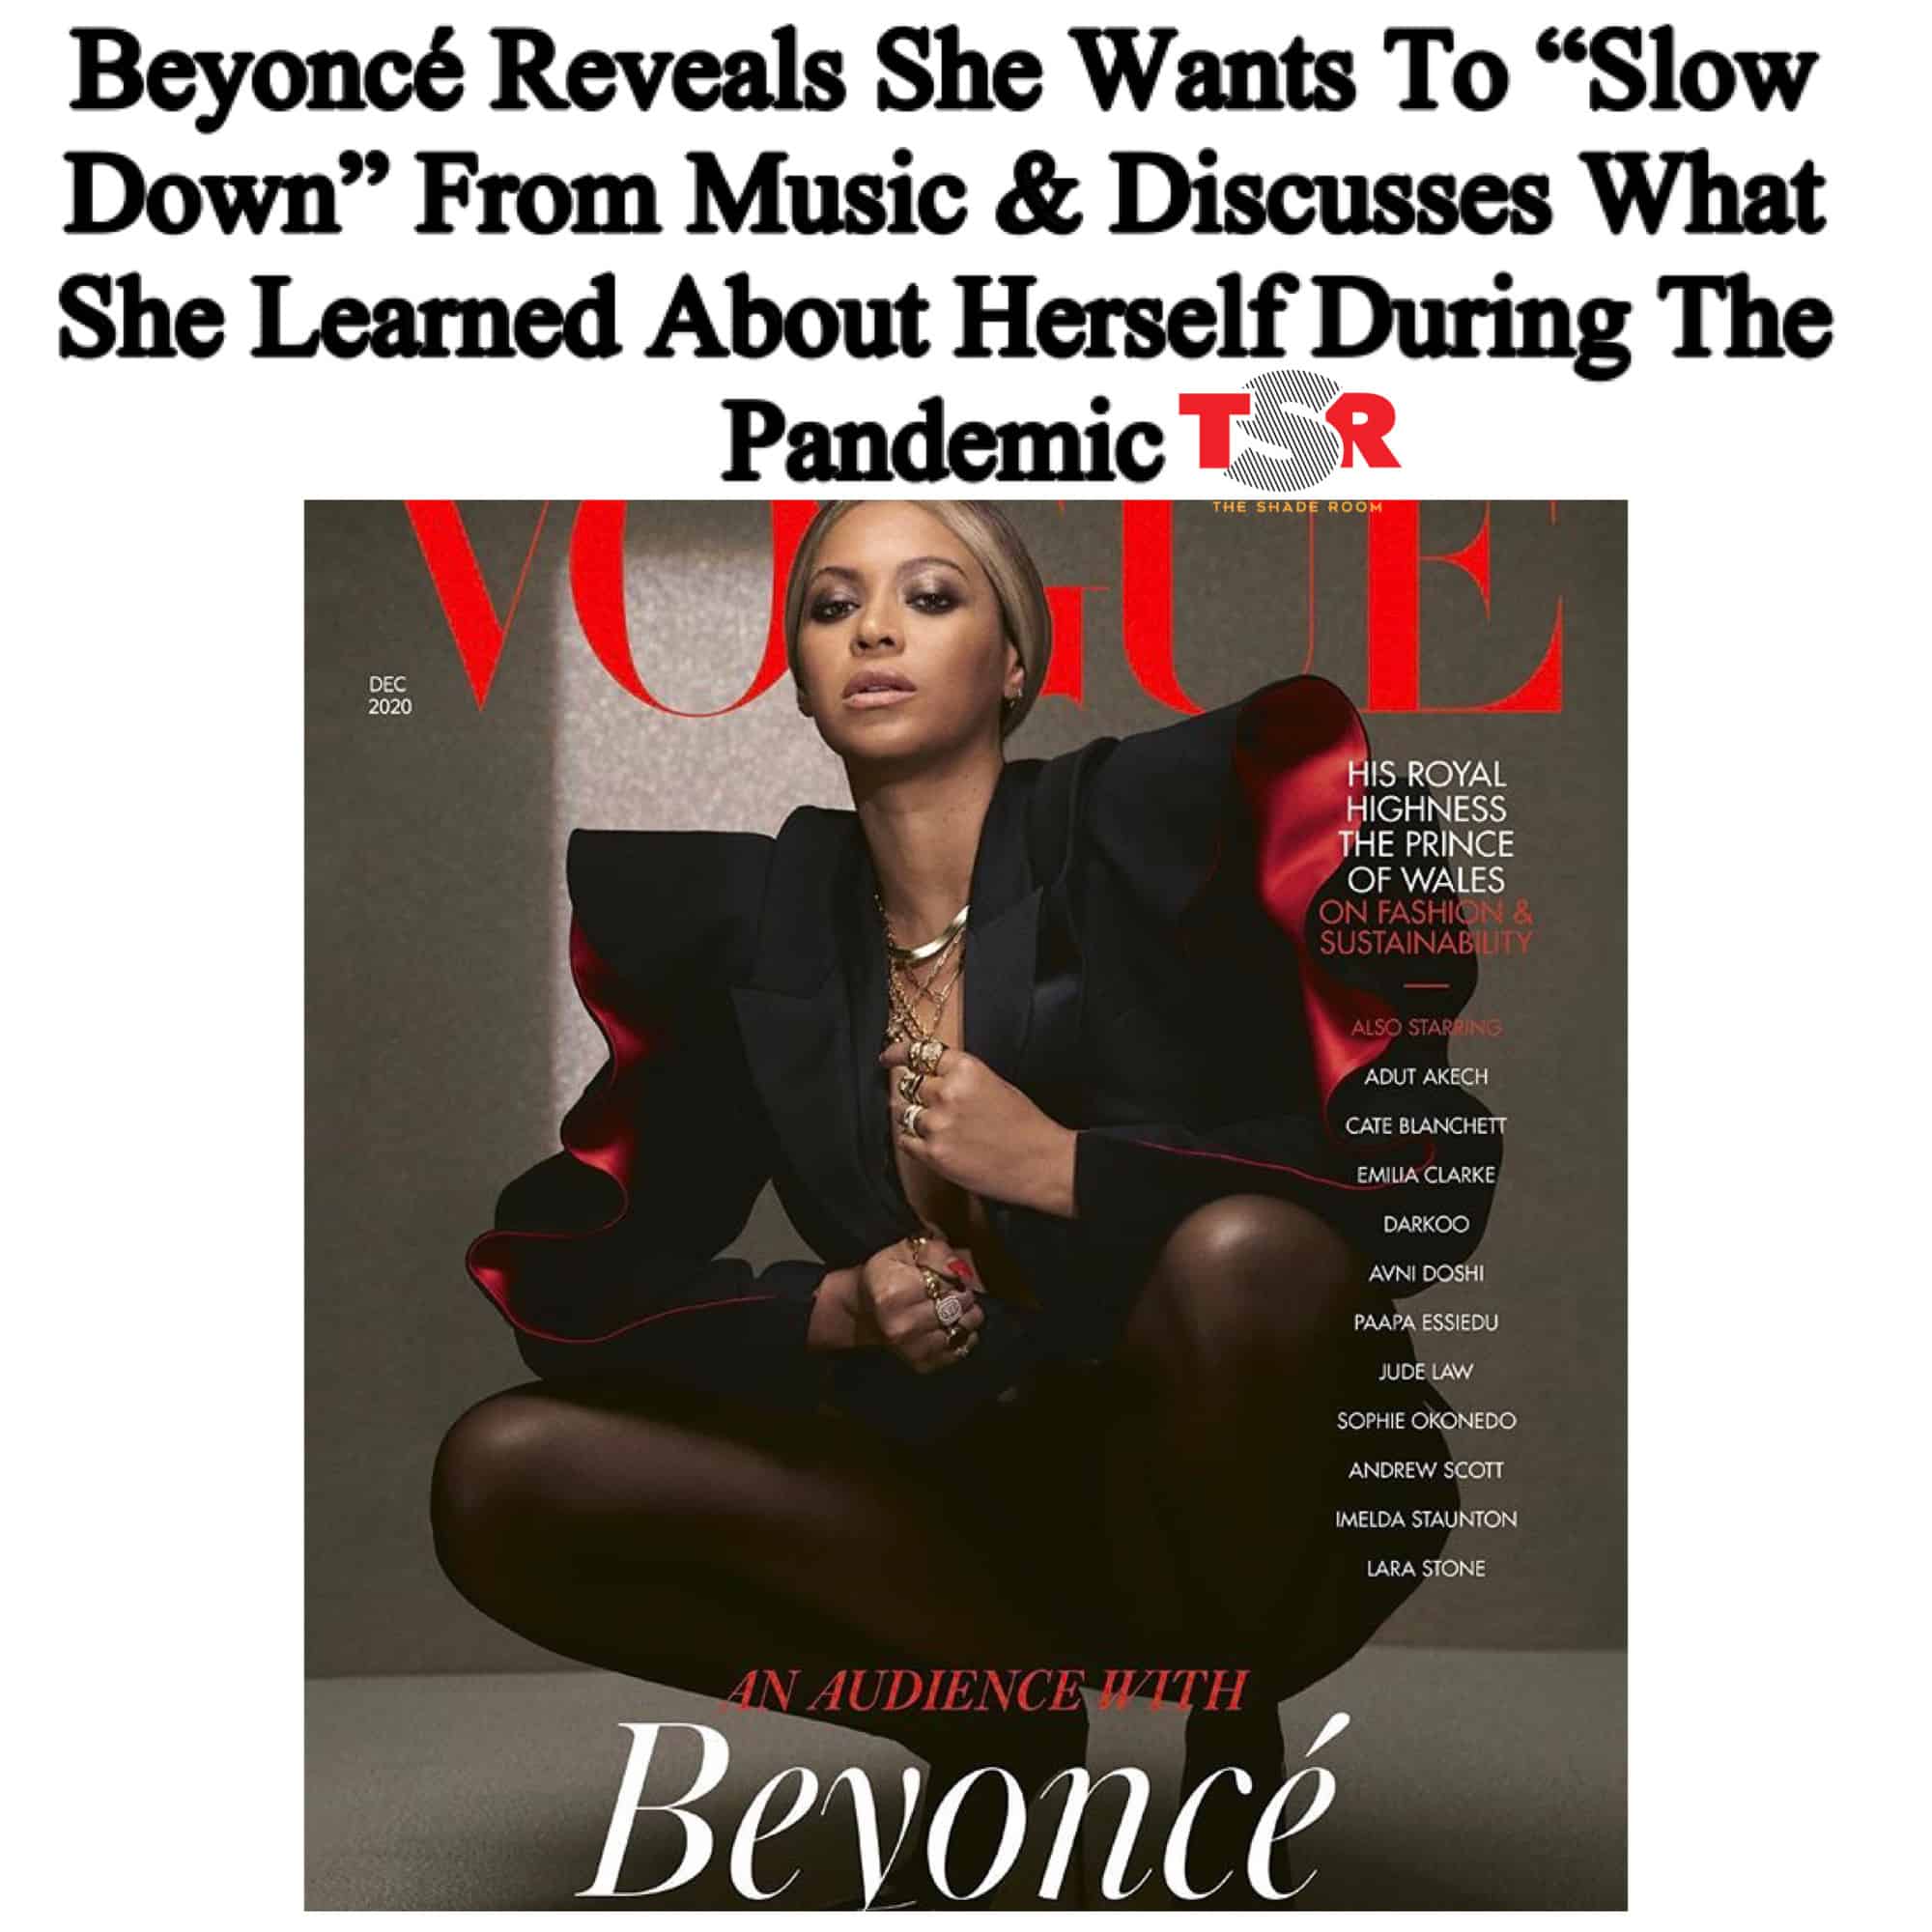 <div>Beyoncé Reveals She Wants To “Slow Down” From Music & Discusses What She Learned About Herself During The Pandemic</div>